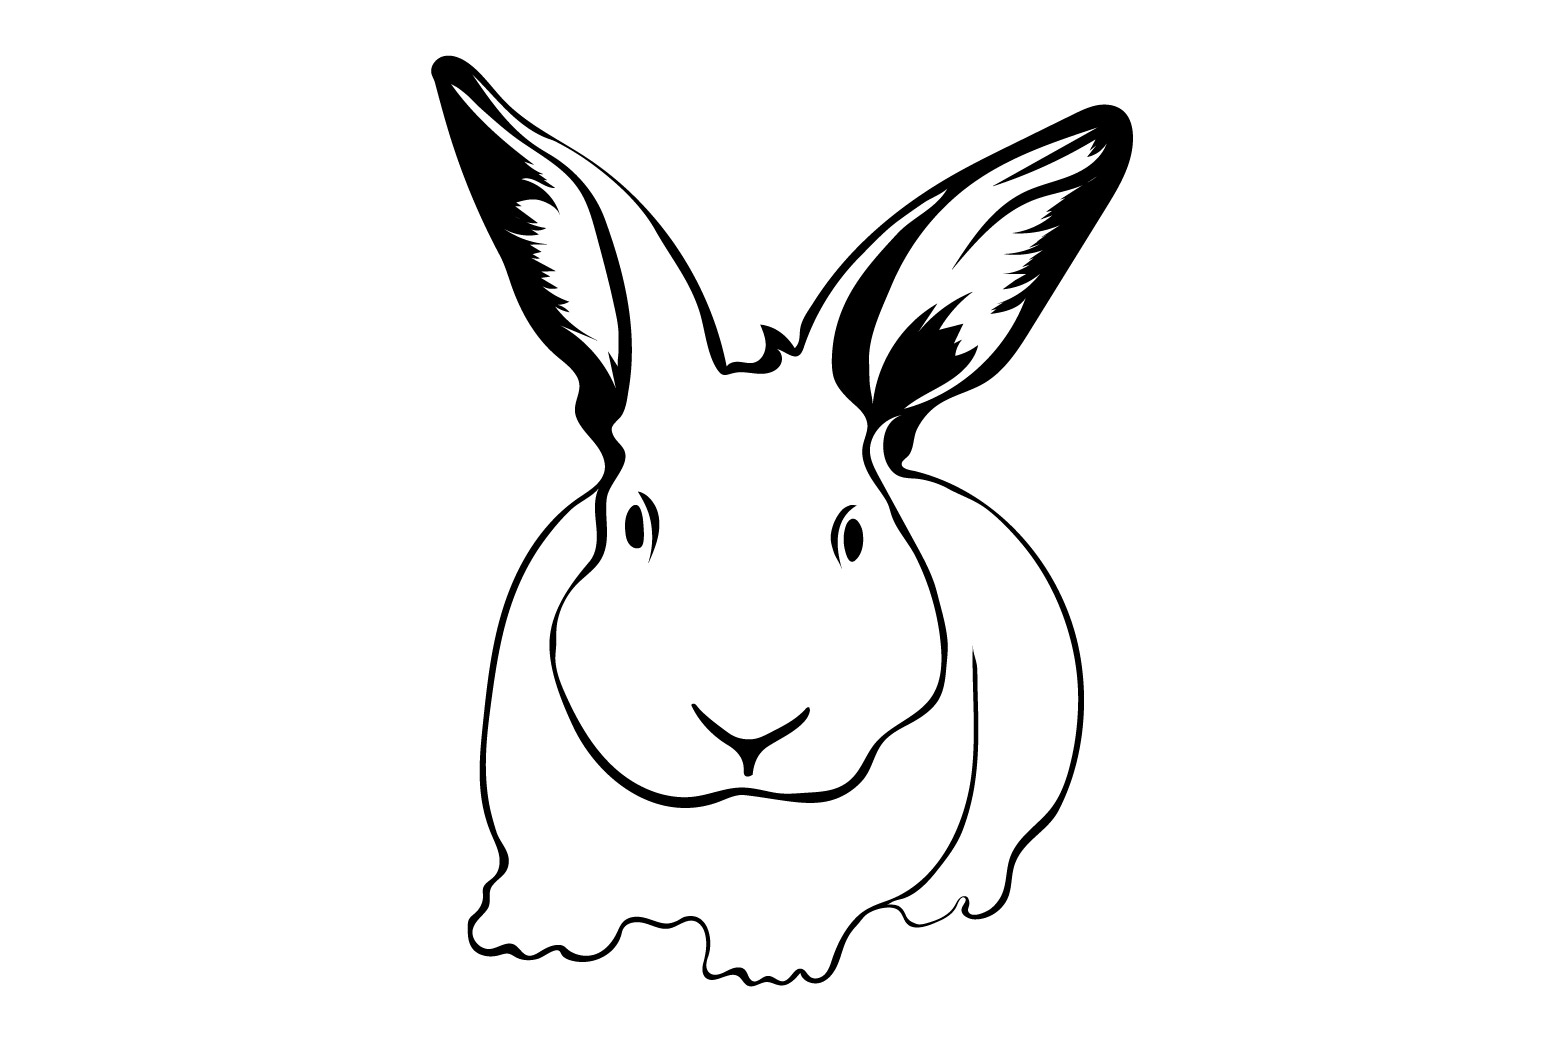 Black and white drawing of a rabbit.